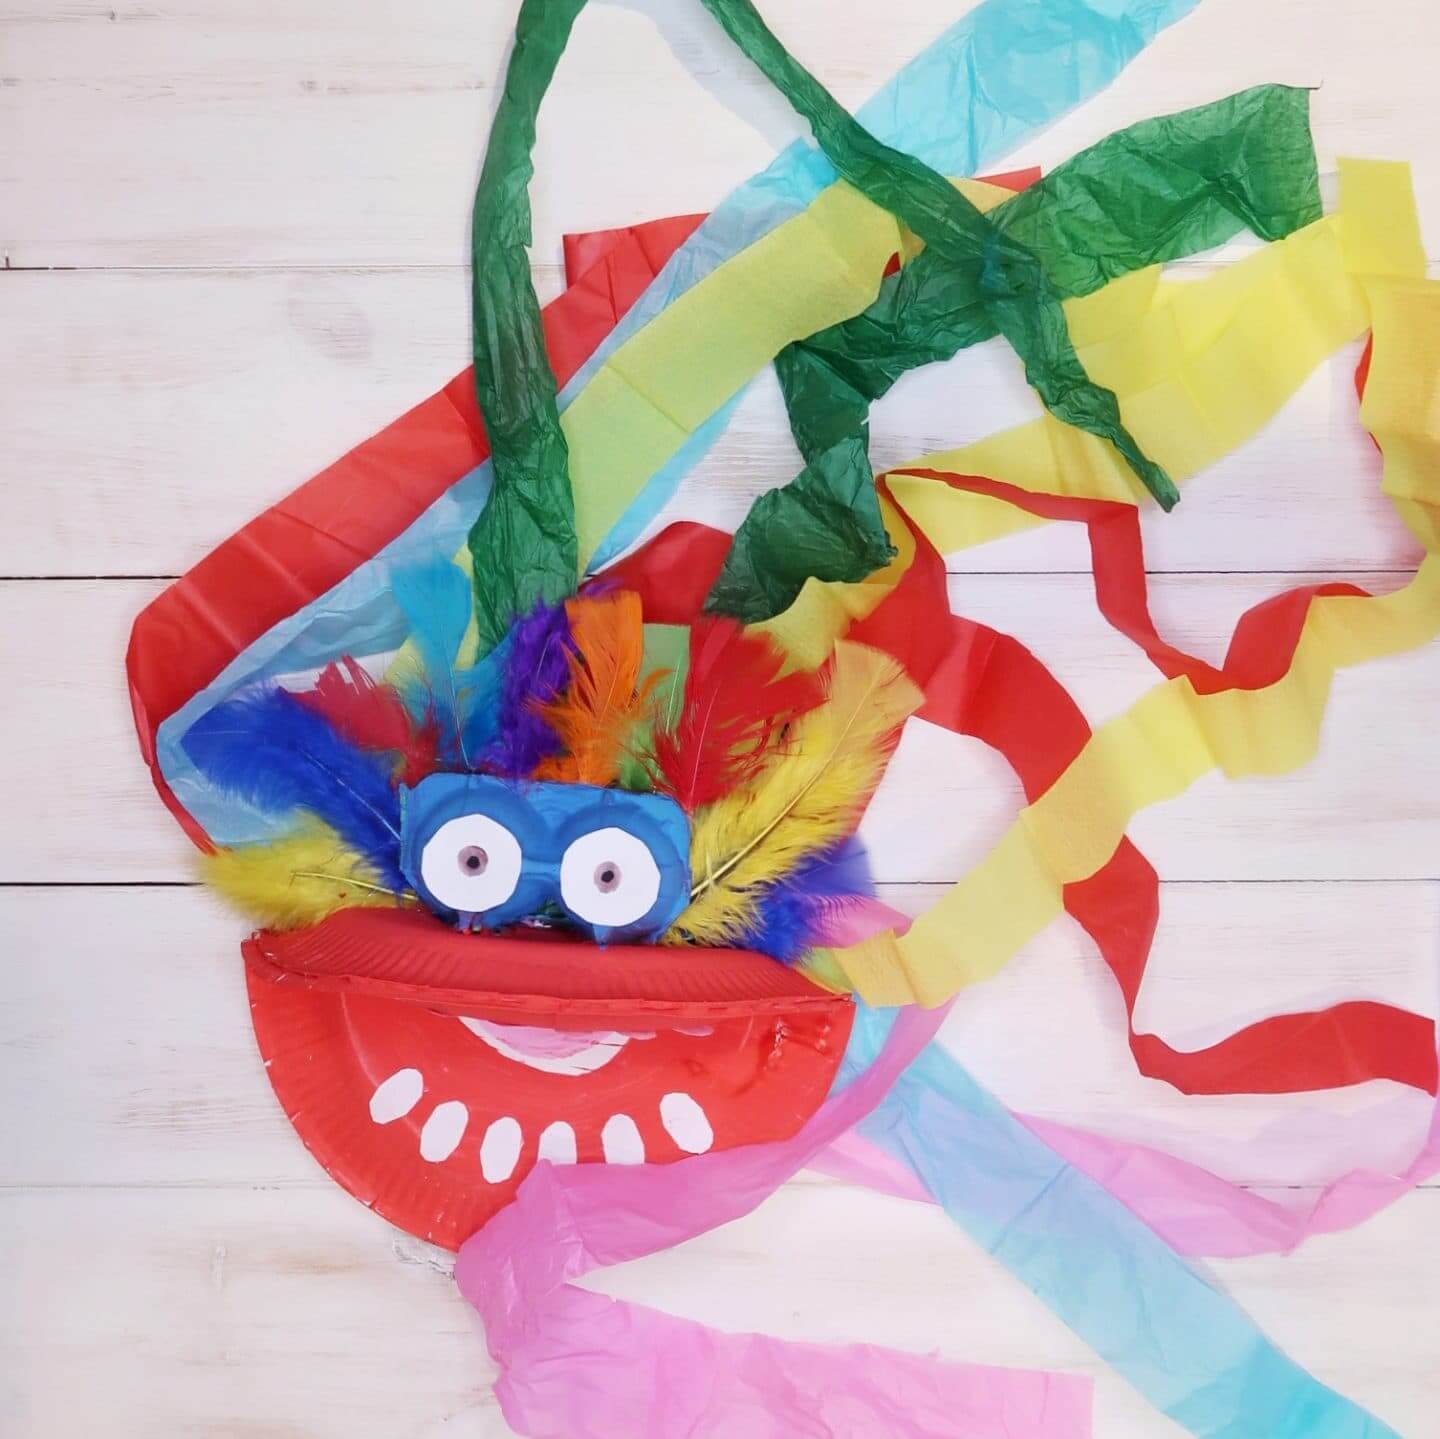 Chinese New Year Dragon Puppet Craft Using Paper Plate Tissue & Feathers